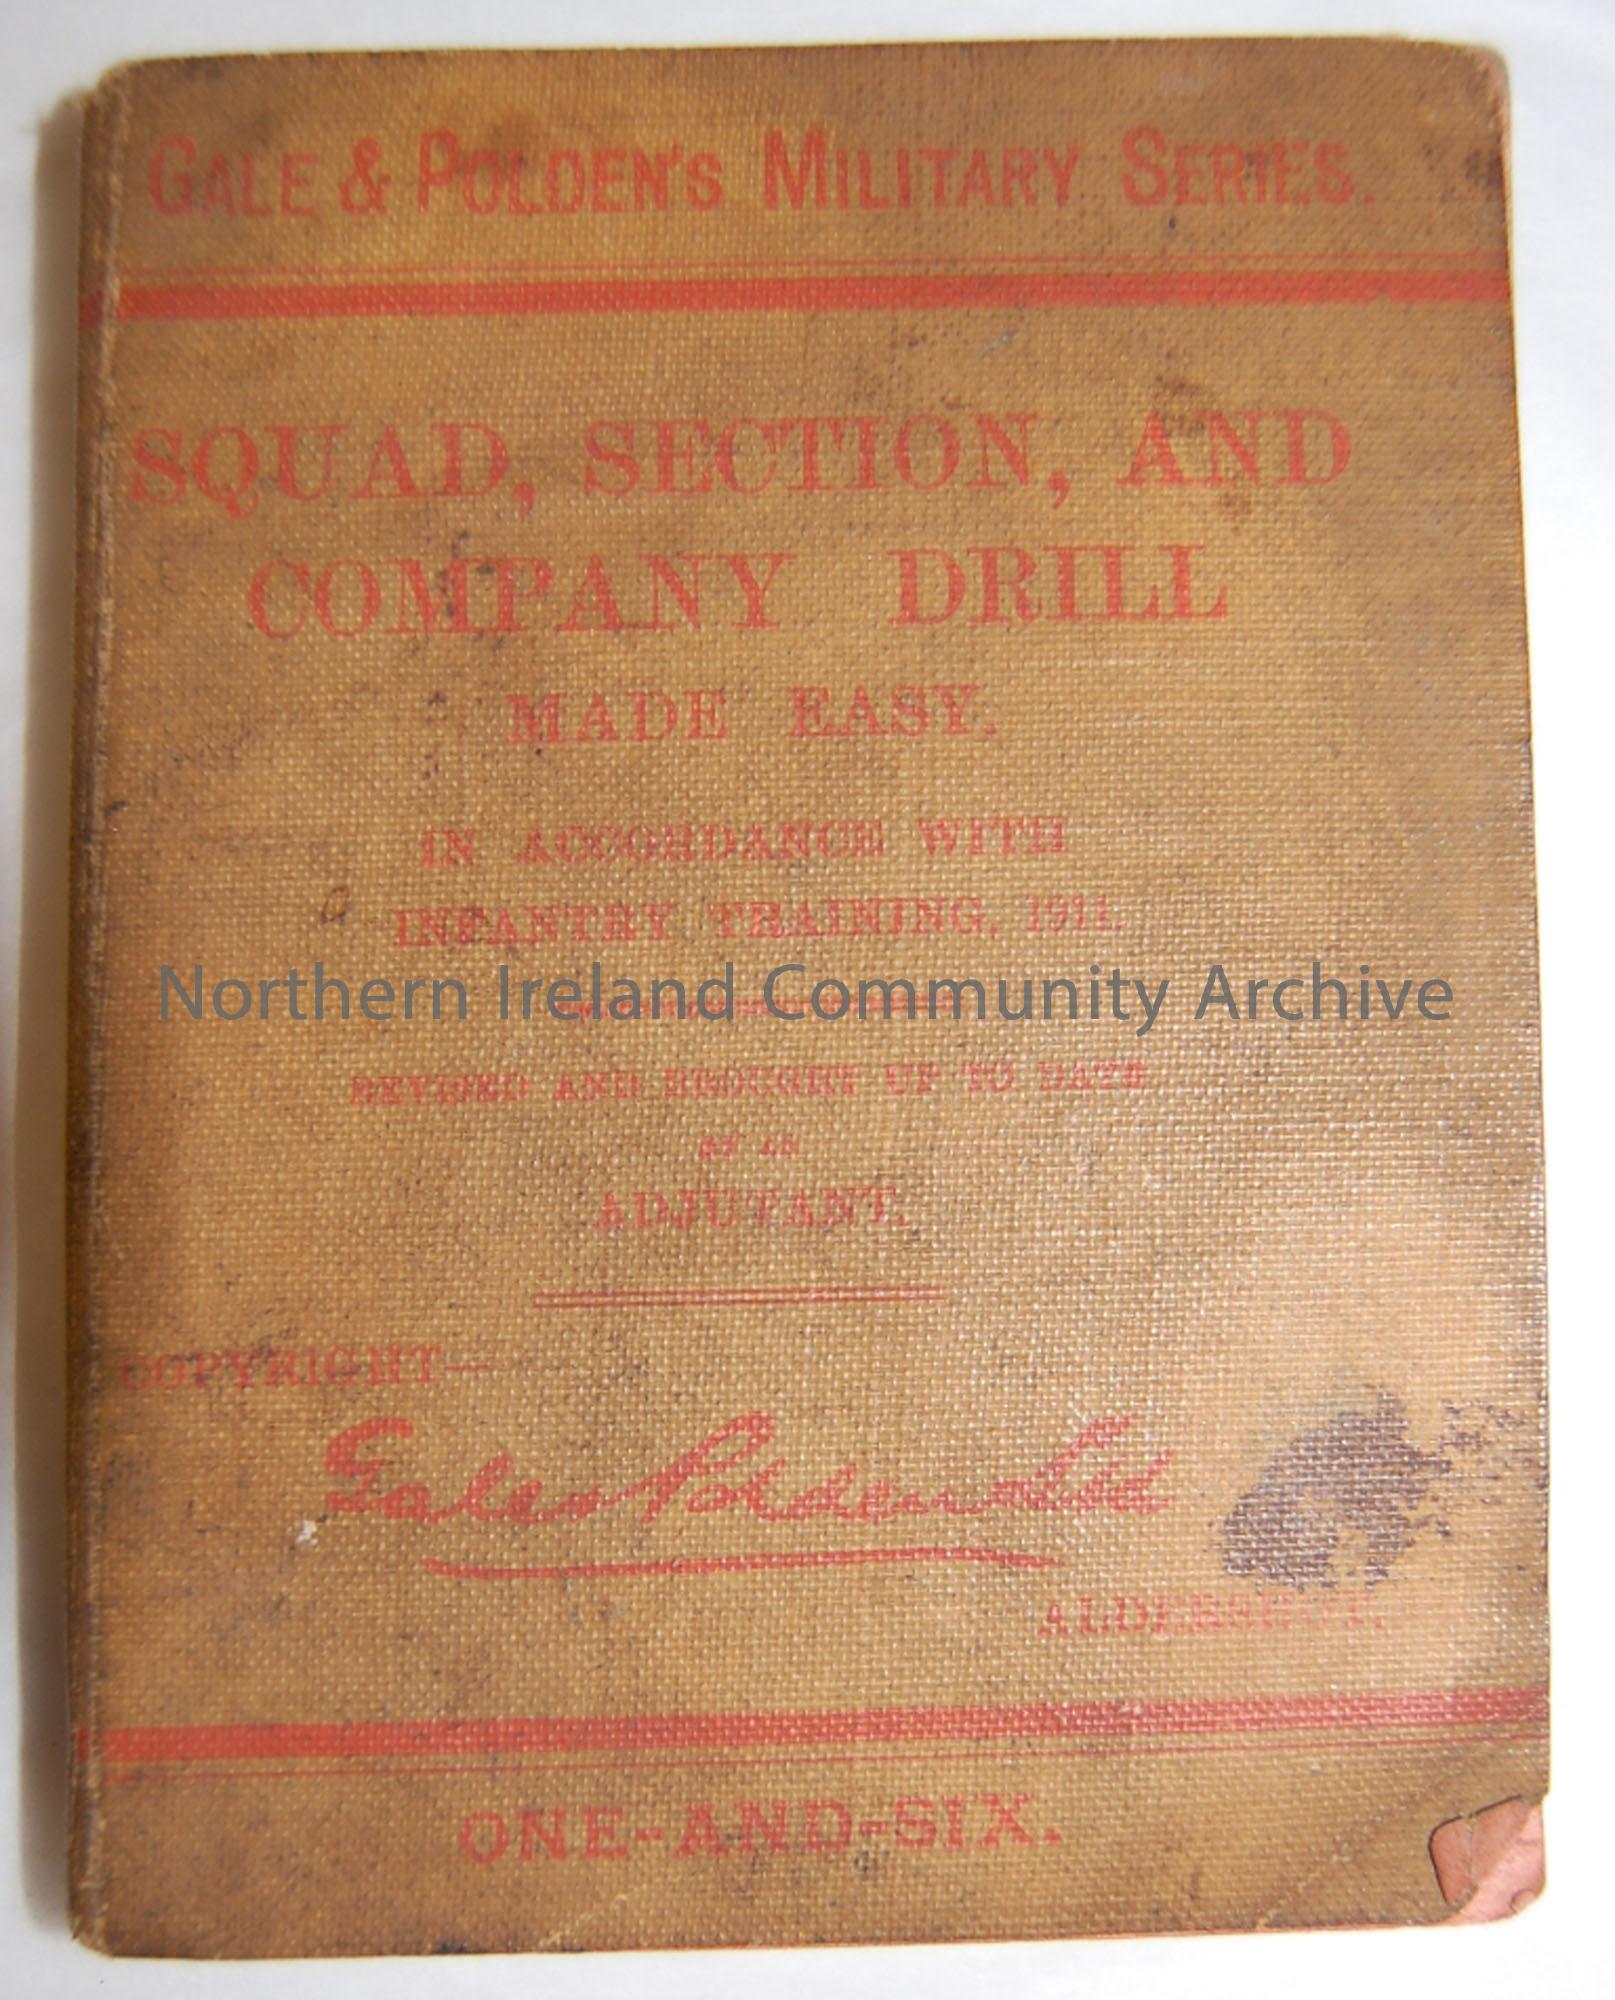 Squad section & company drill made easy in accordance with infantry training, 1911. WWI